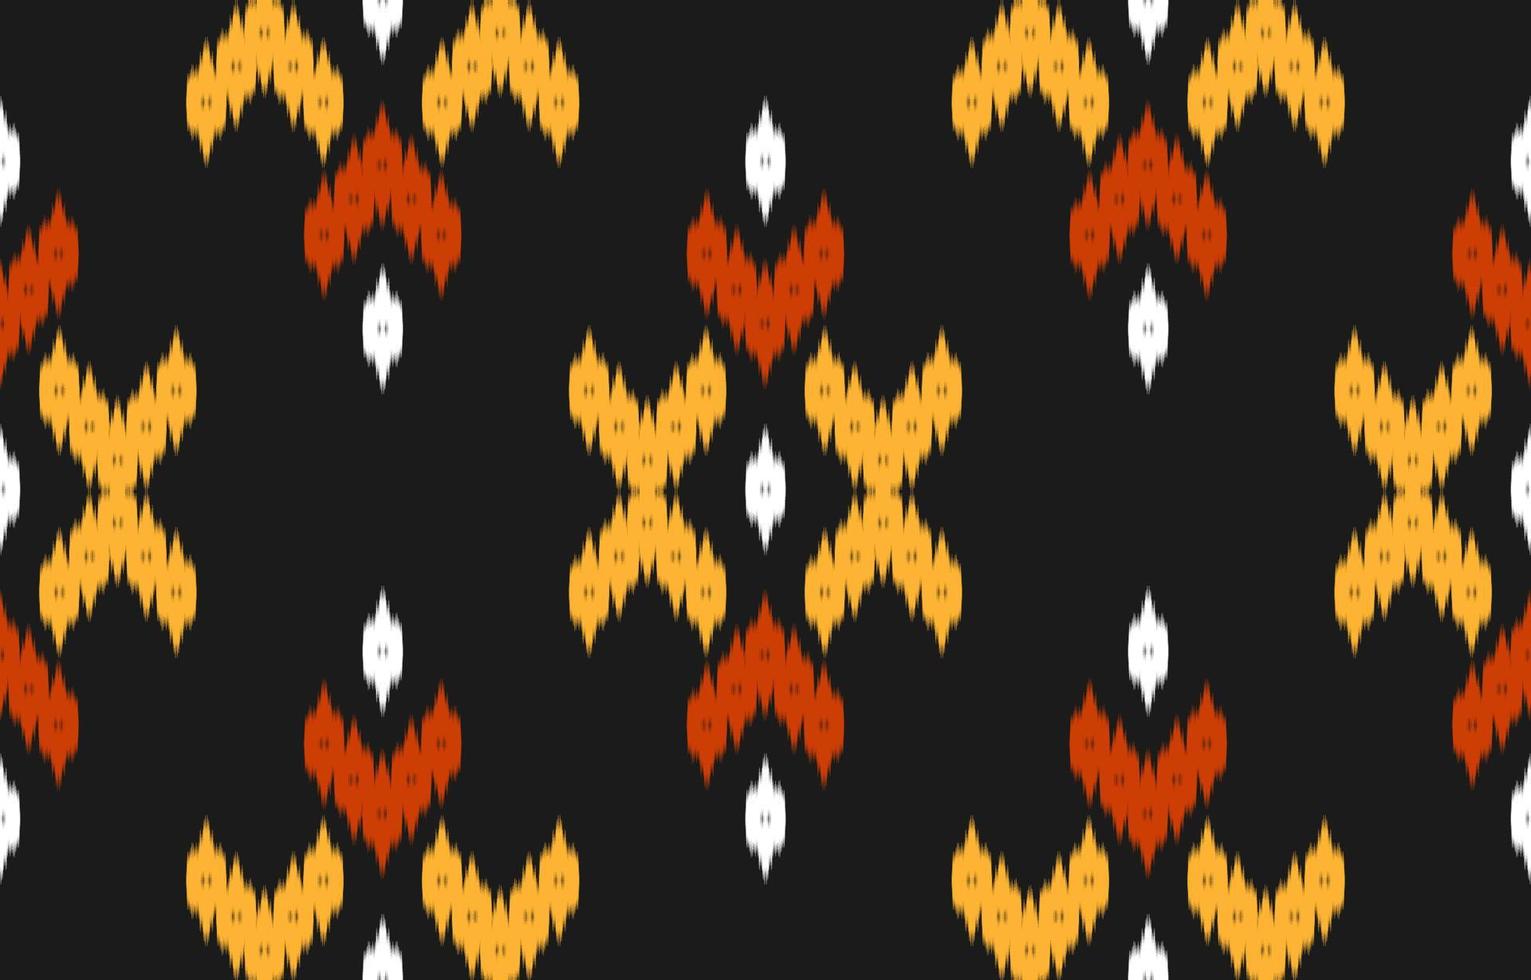 Beautiful ethnic tribal pattern art. Ethnic ikat seamless pattern. American and Mexican style. vector